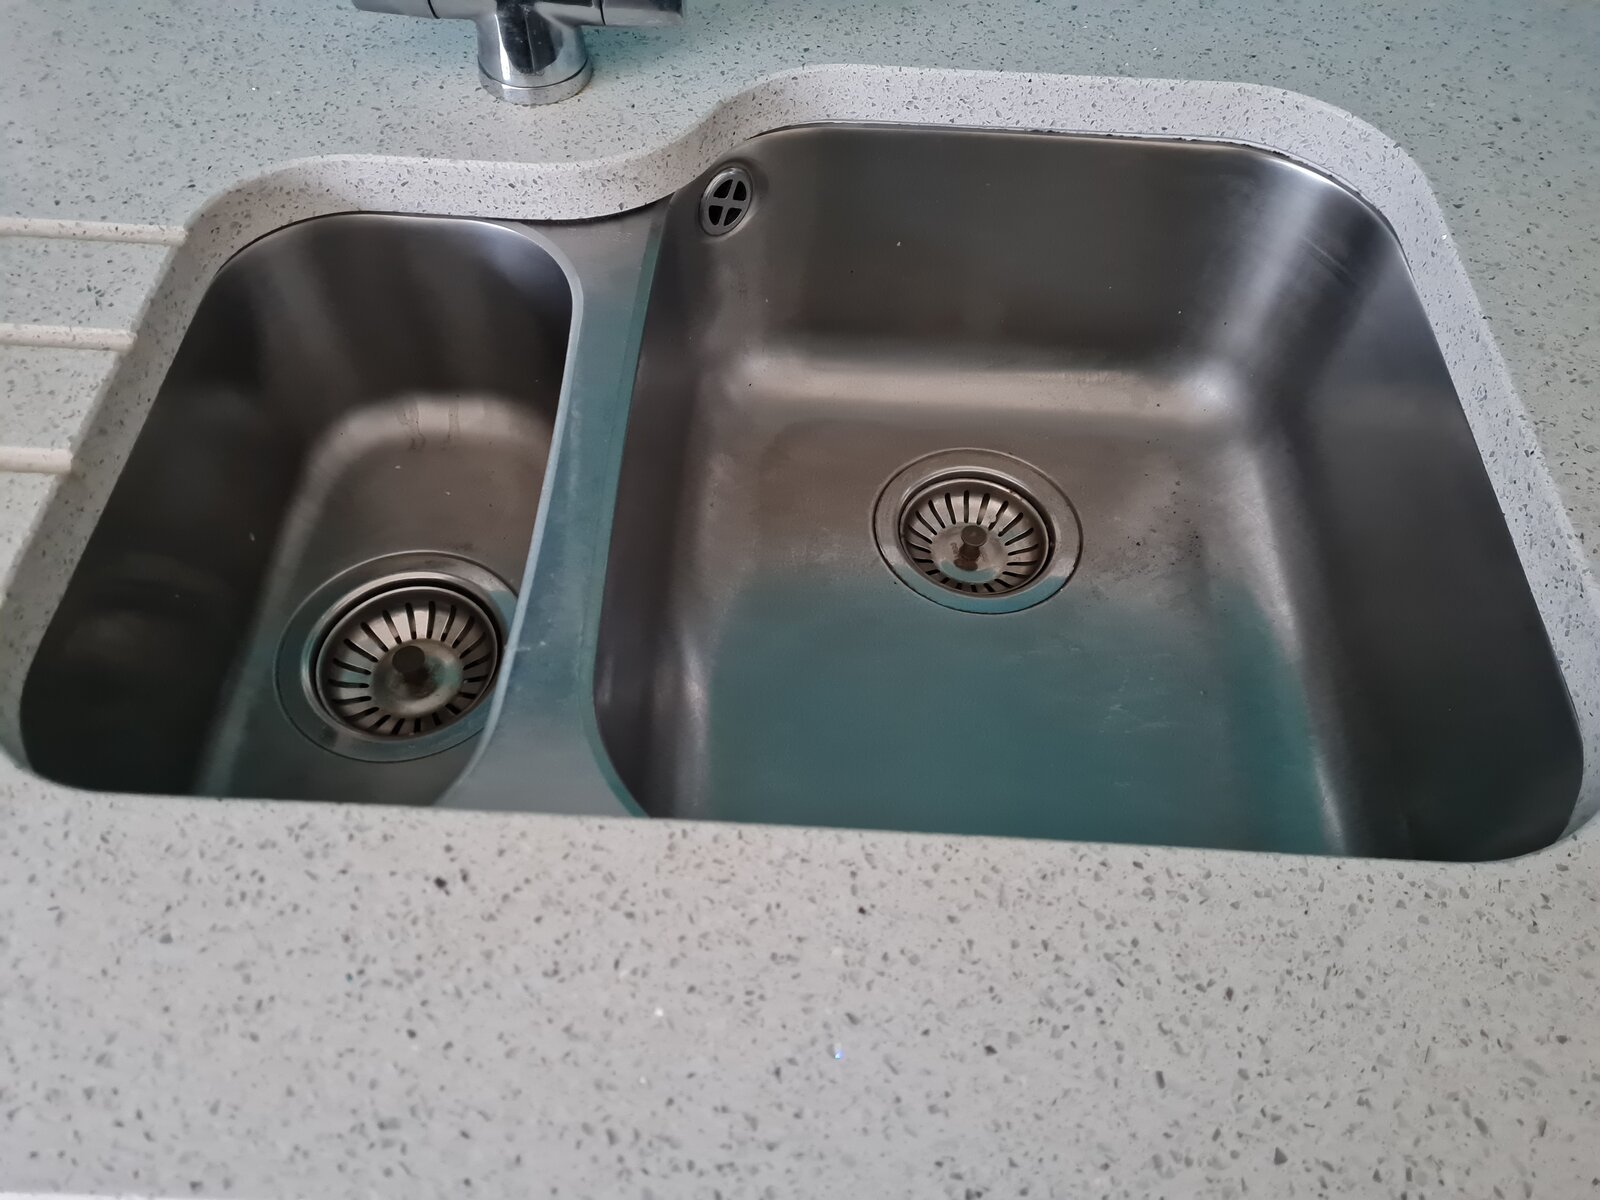 Undermount Kitchen Sink Silicone Mouldy | DIYnot Forums